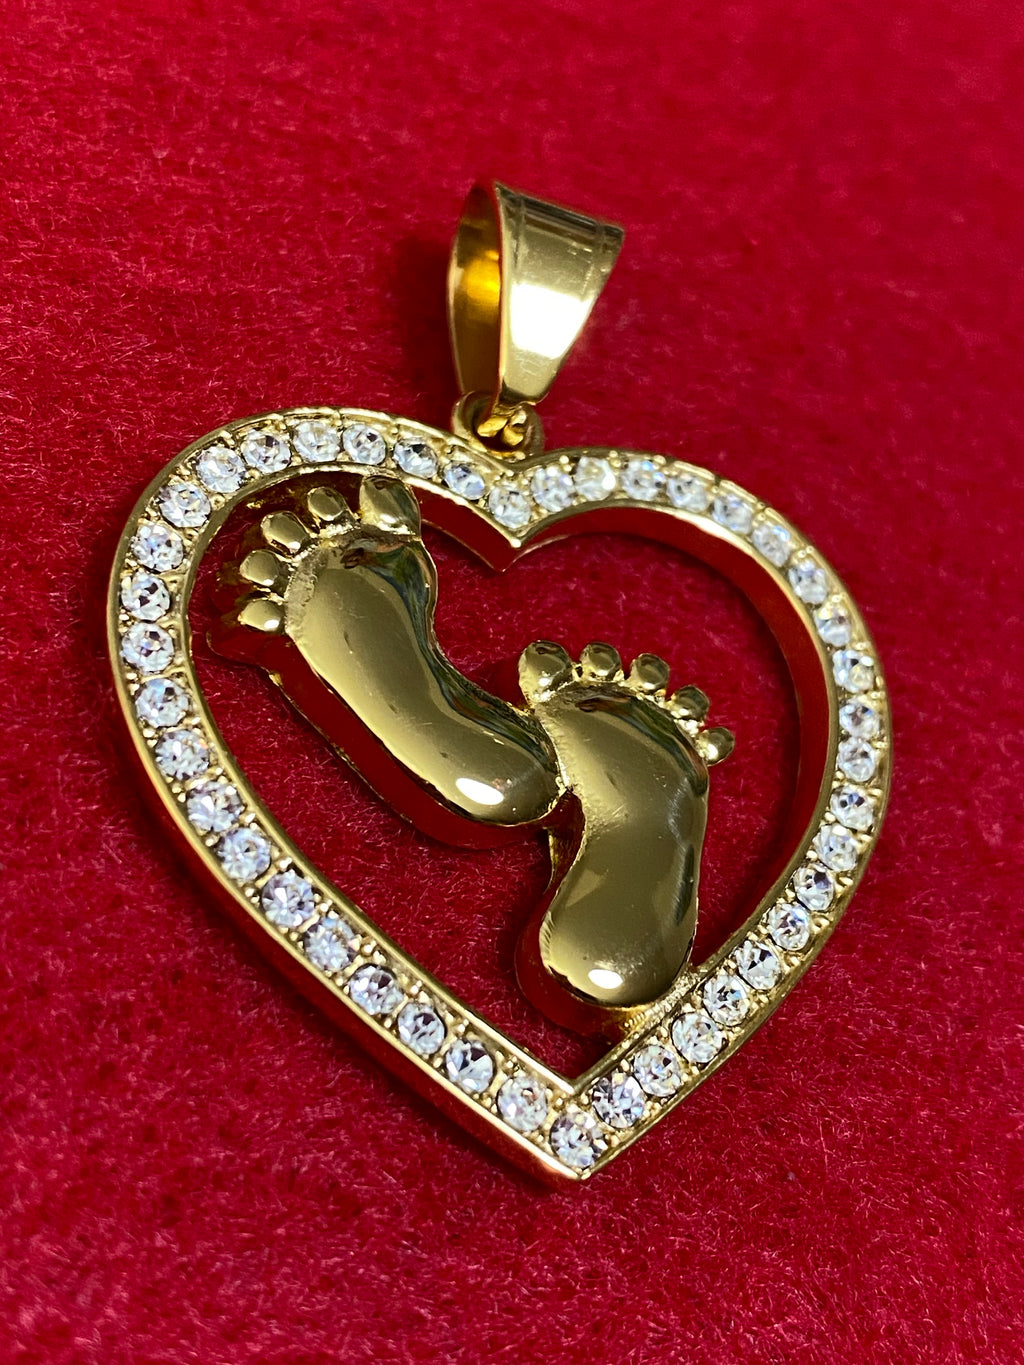 Footprints pendant and chain